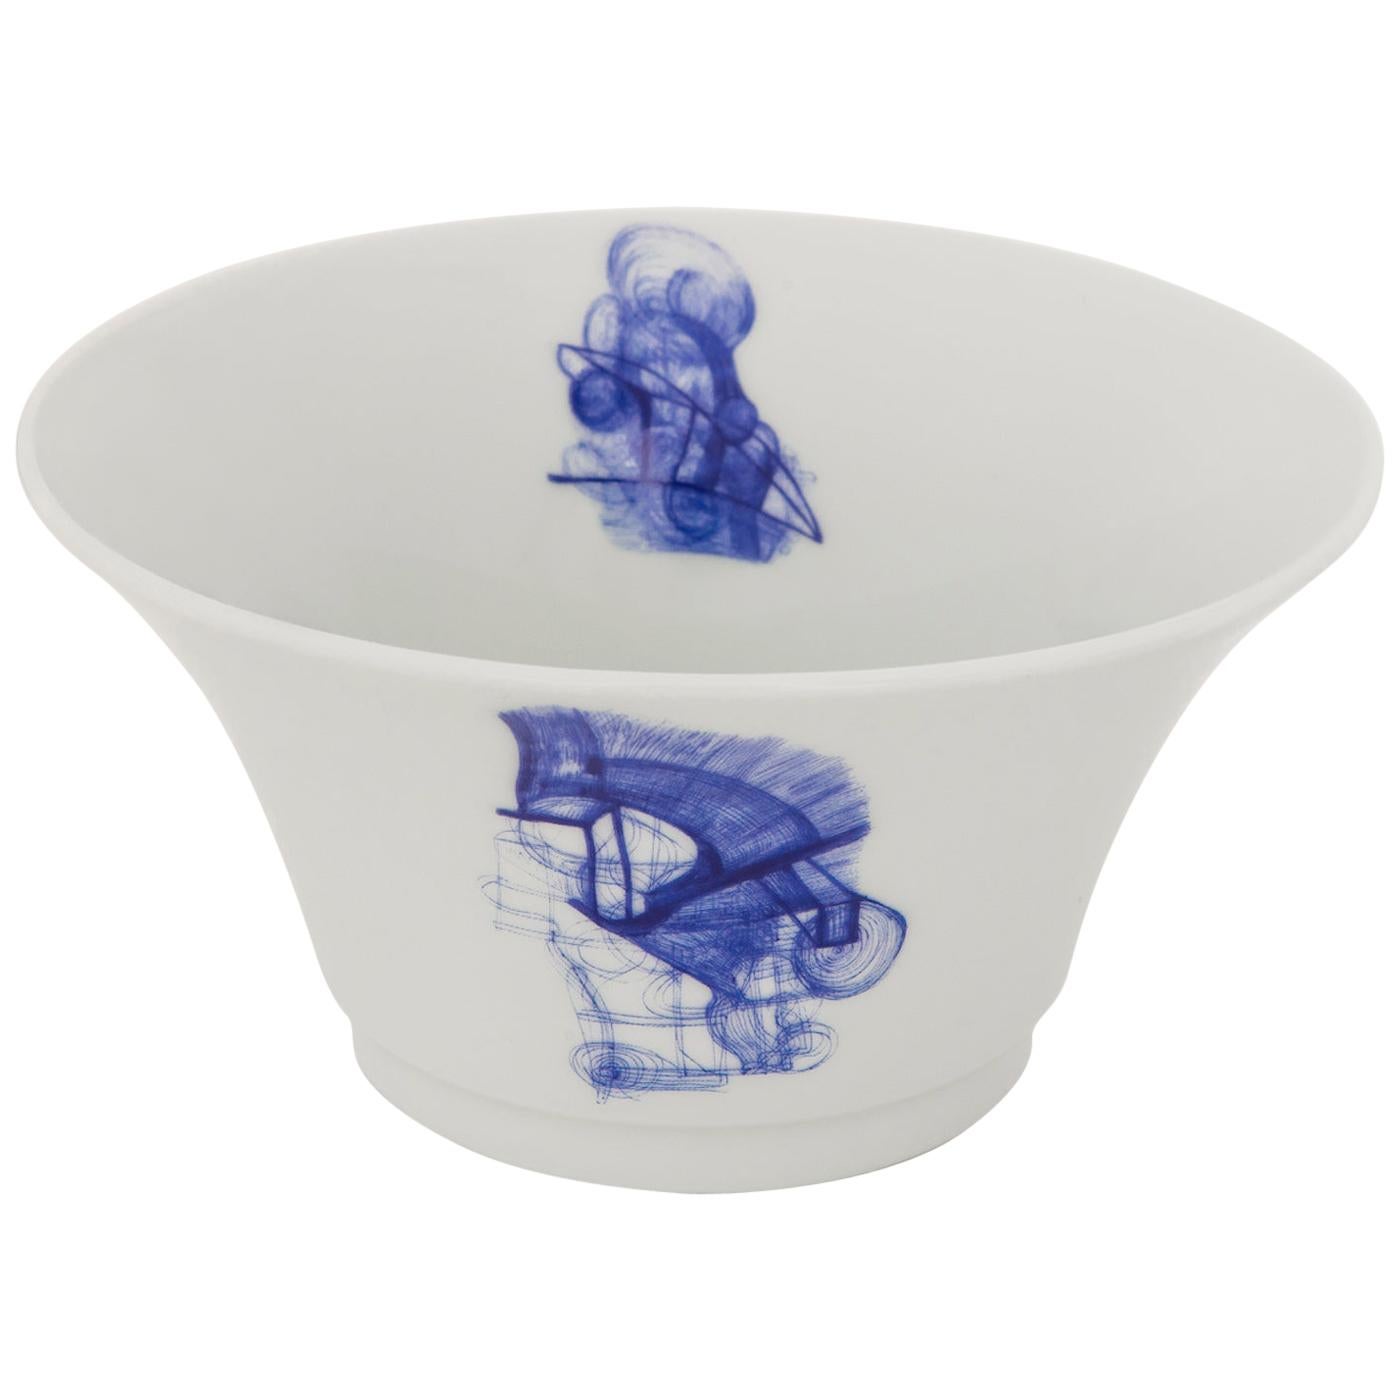 Delpht Blue and White French Limoges Porcelain Deep Bowl, Exclusive Edition For Sale